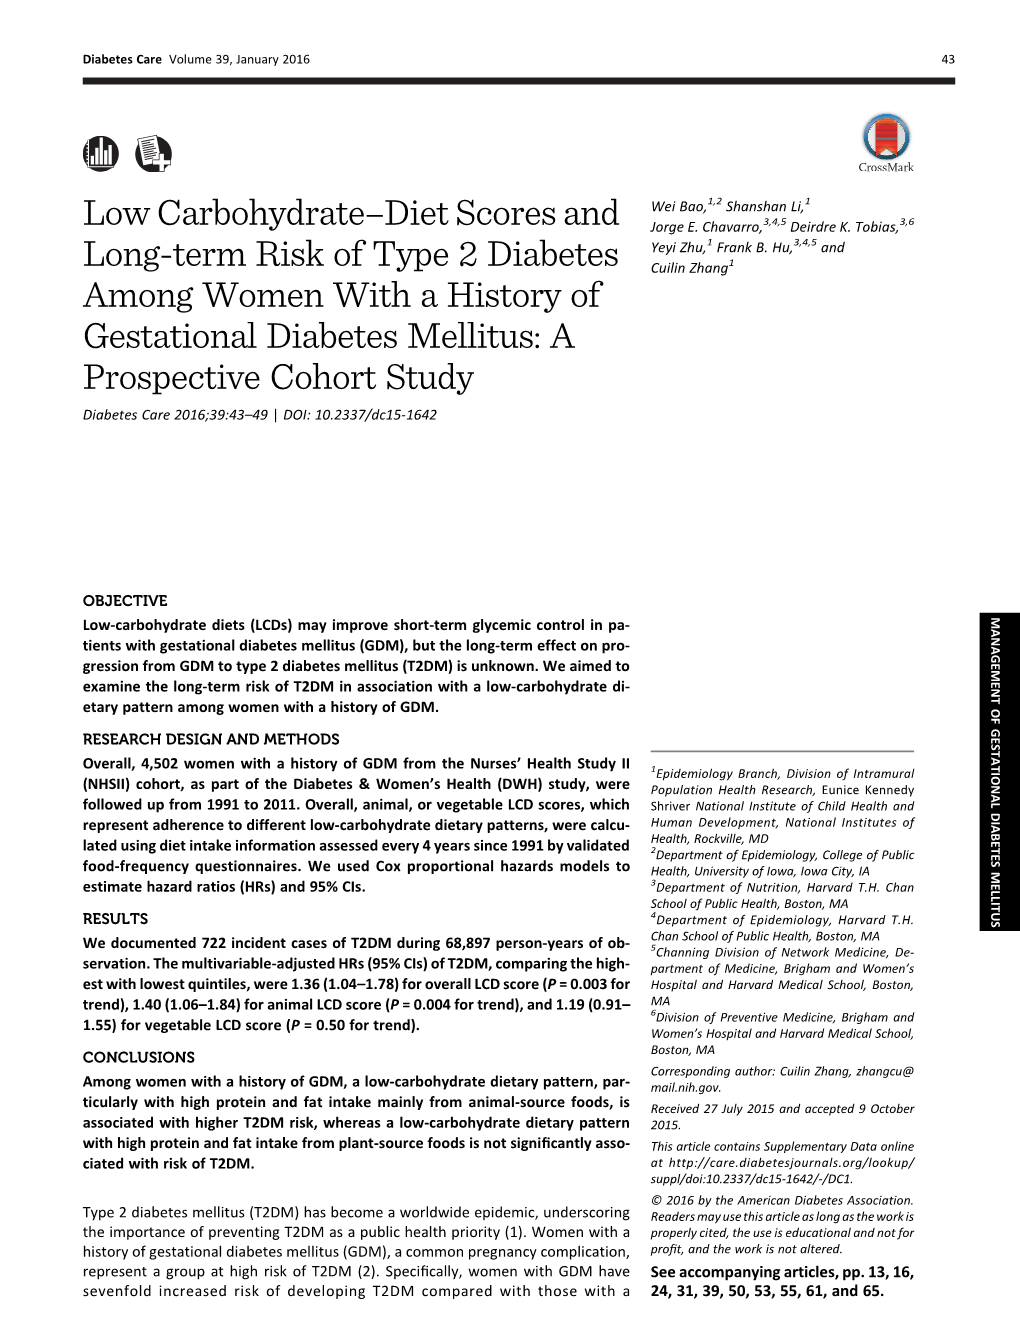 Low Carbohydrate–Diet Scores and Long-Term Risk of Type 2 Diabetes